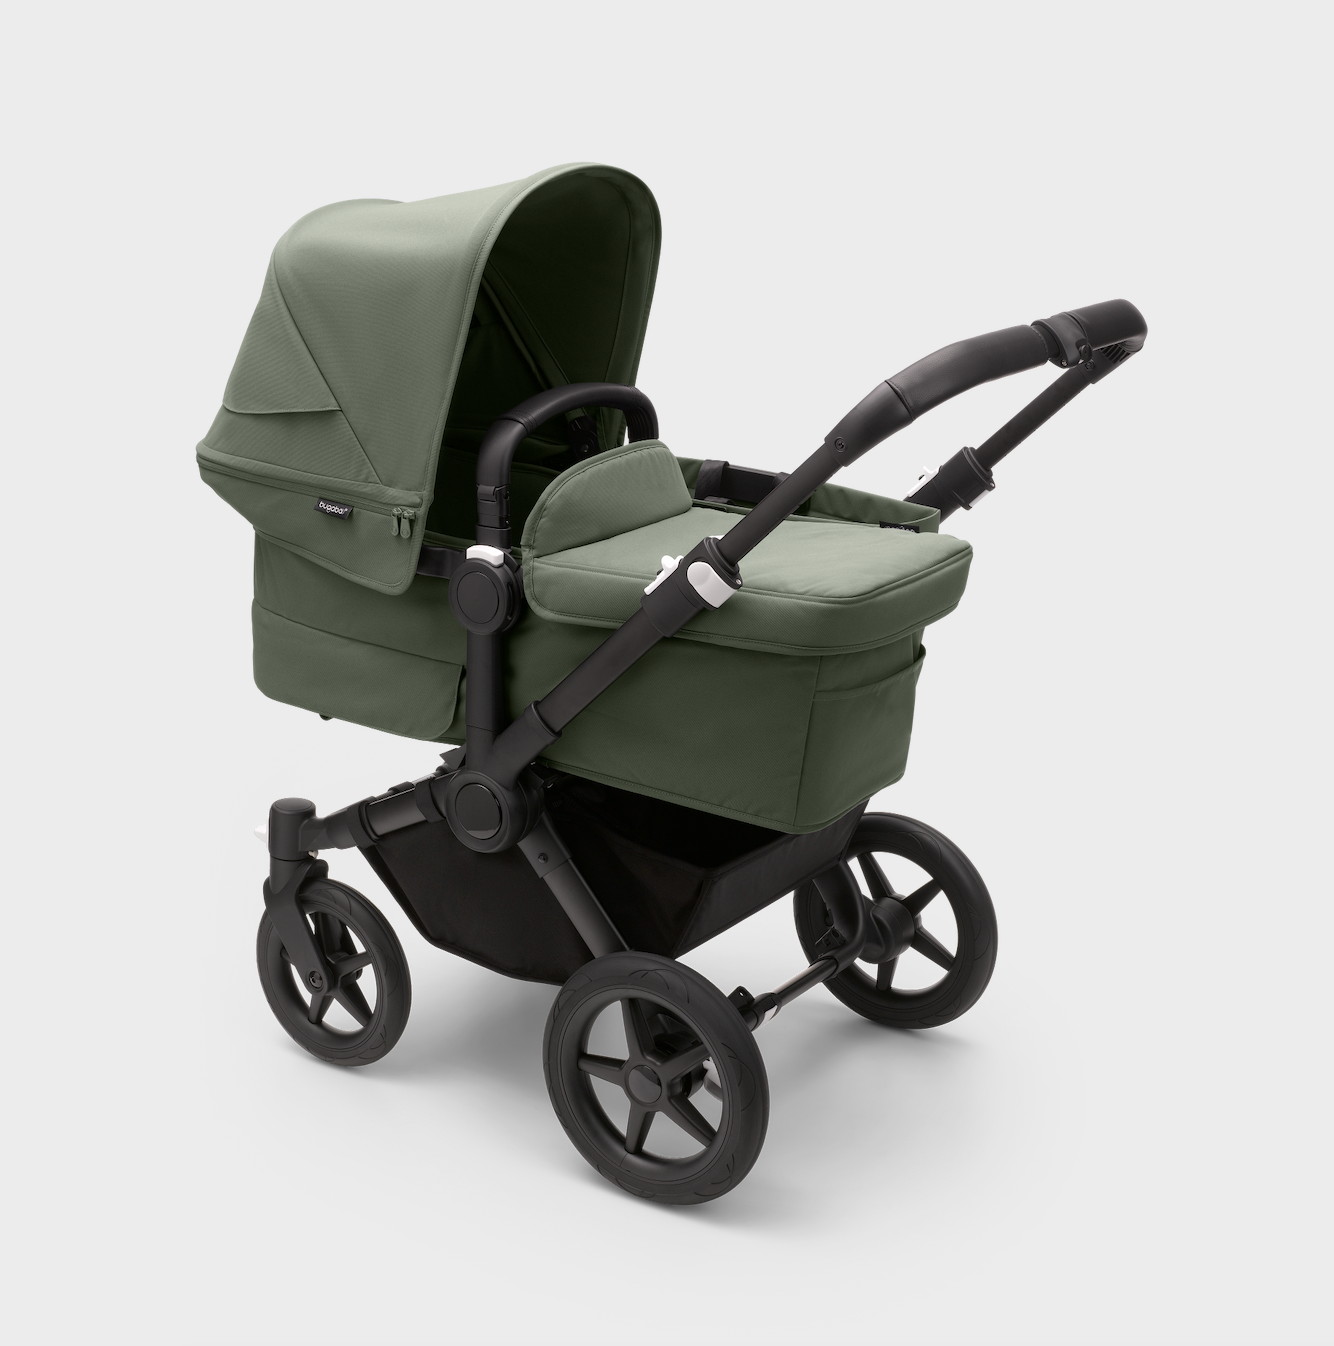 Bugaboo Donkey 5 Twin Pushchair & Turtle Air 360 Travel System - Black/Forest Green